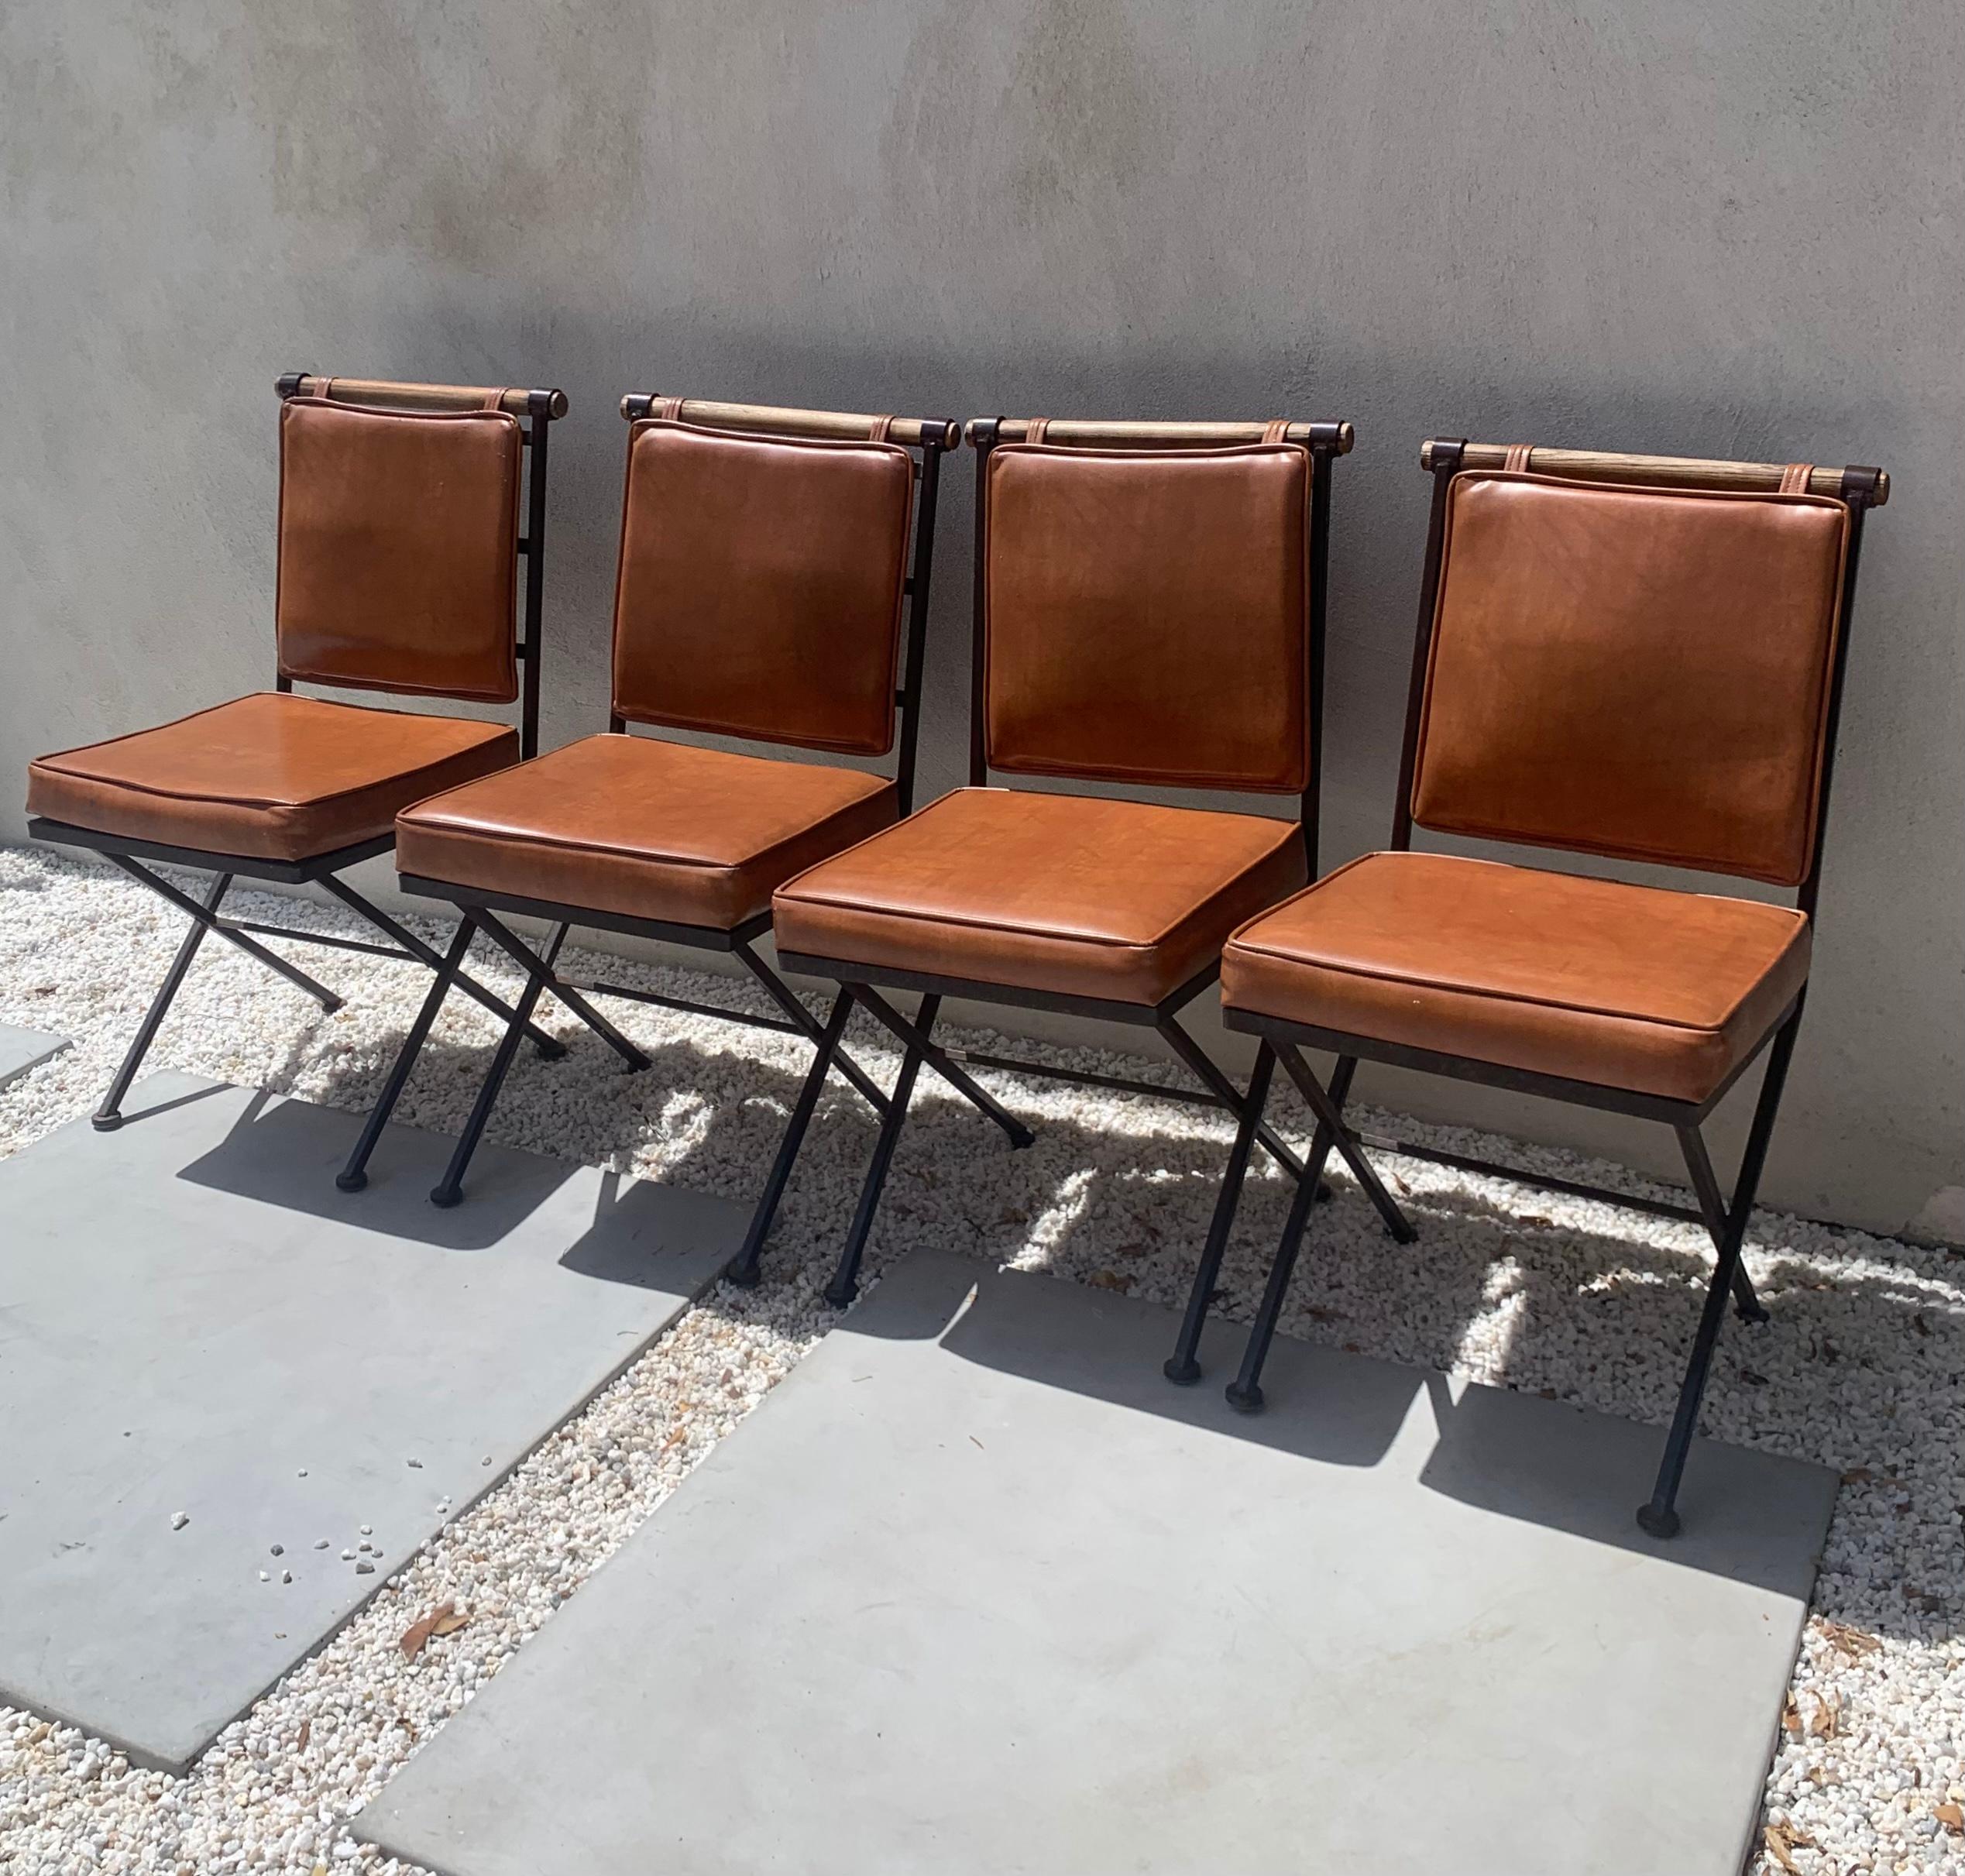 A set of four Cleo Baldon style dining chairs by Inca, mid 1960s. Iron, oak, and leather in a rich saddle hue. Some minor wear to material (see photos); overall great vintage condition. Pick up in LA or delivery options available.

Measures: 16” W